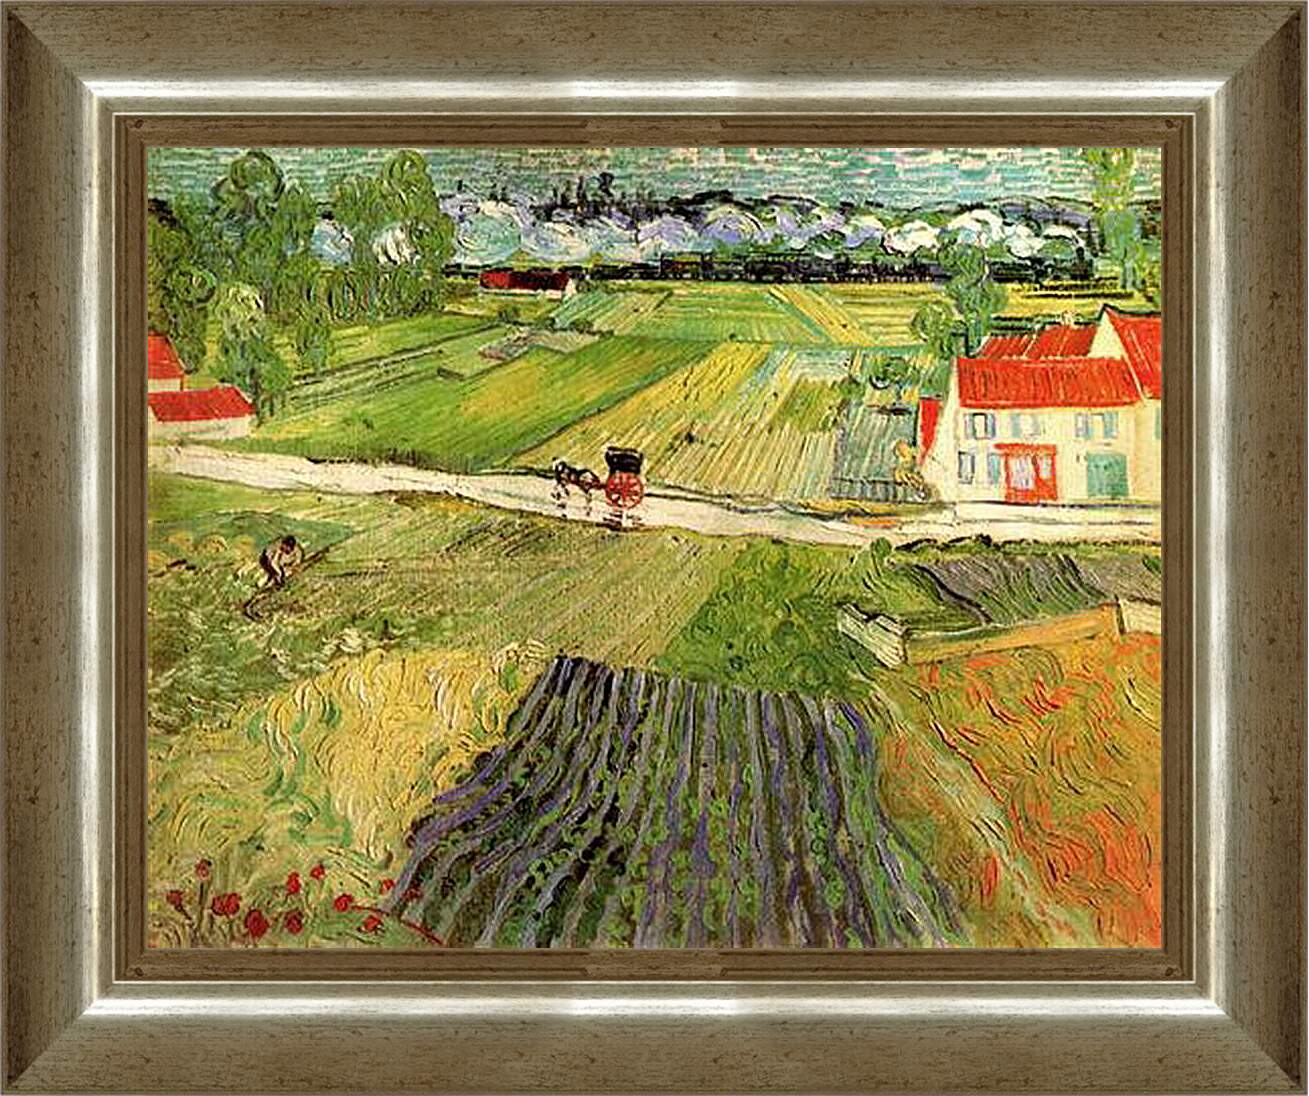 Картина в раме - Landscape with Carriage and Train in the Background. Винсент Ван Гог